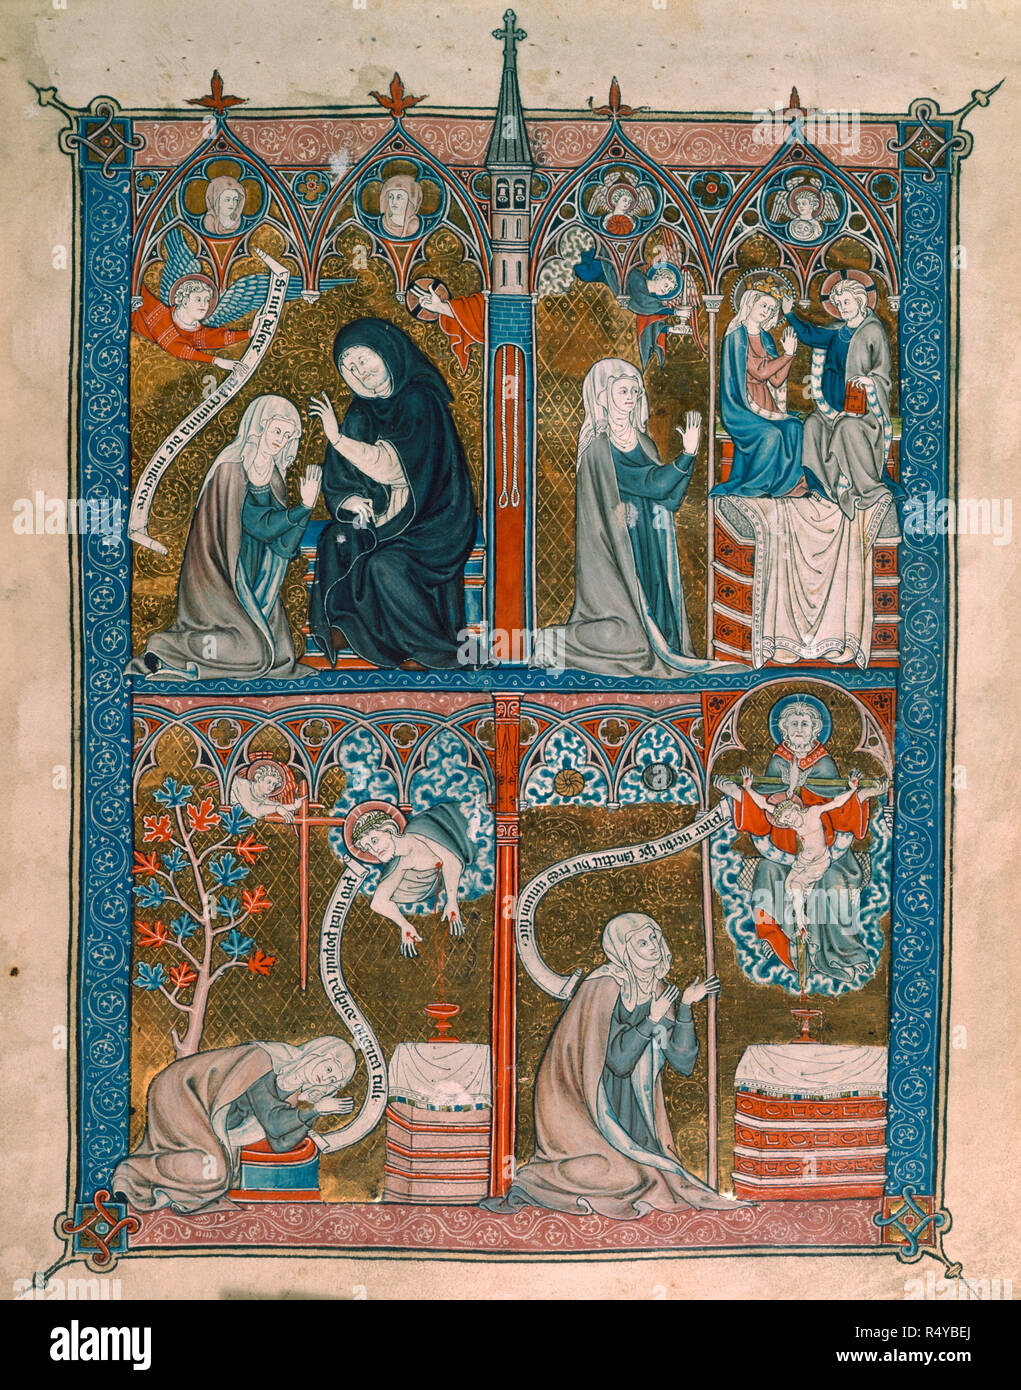 Penitence and Contemplation [Whole folio] Above left Penitence; a nun kneels before a priest who blesses her; an angel with a scroll and above the priest the Hand of God. Above right Devotion; a nun kneels with clasped hands with angel above holding a candlestick with lighted candle. On the right an altar on which is the seated figure of Christ crowning the Virgin. Below left Contemplation; a nun kneels almost prostrate before an altar with Christ above blood from his wounds pouring into a chalice. Below right; a nun kneeling before an altar with the Holy Trinity above Image taken from Livres  Stock Photo